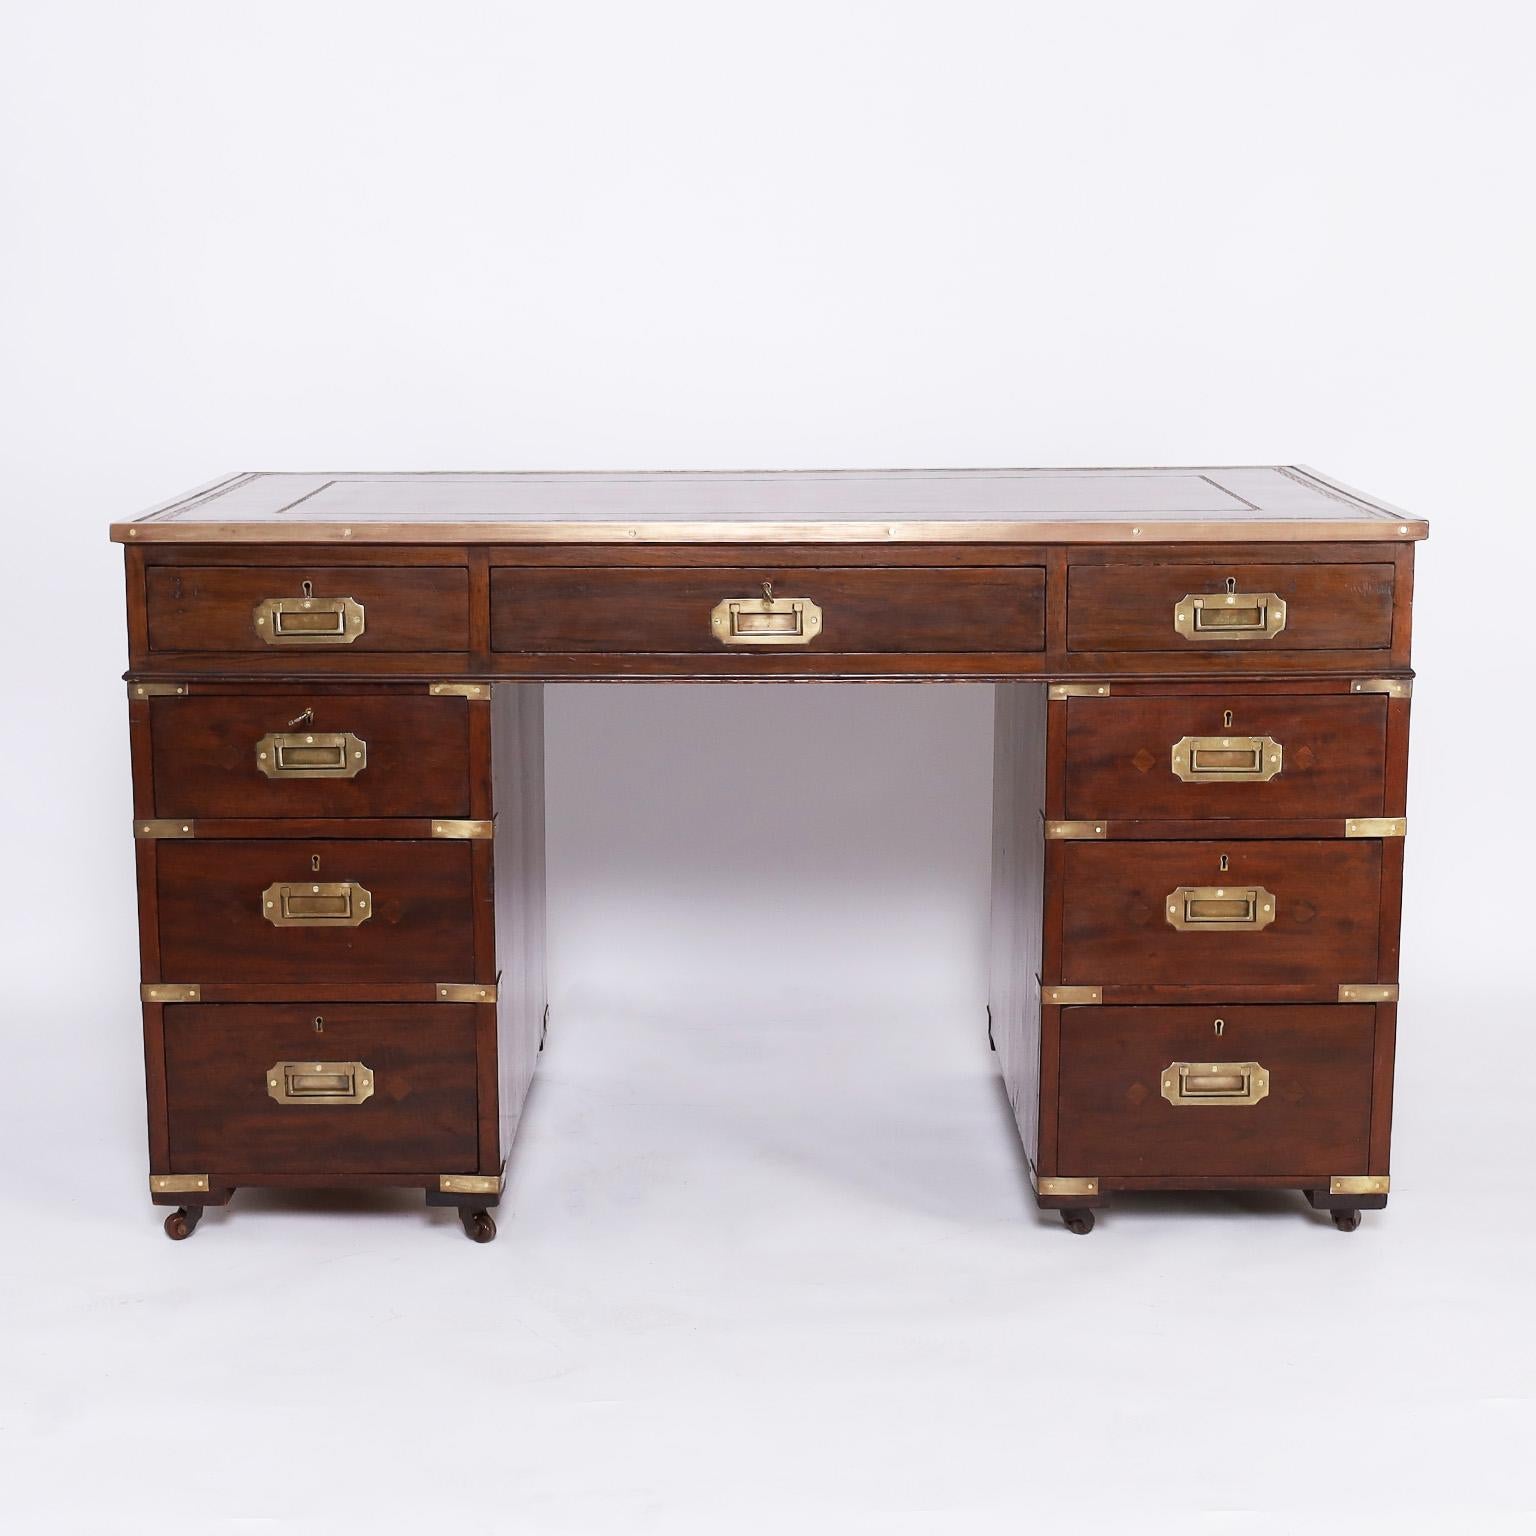 Handsome 19th century British colonial campaign desk with a brown tooled leather top, brass hardware, keys to the top and side drawers, and sits on porcelain casters.